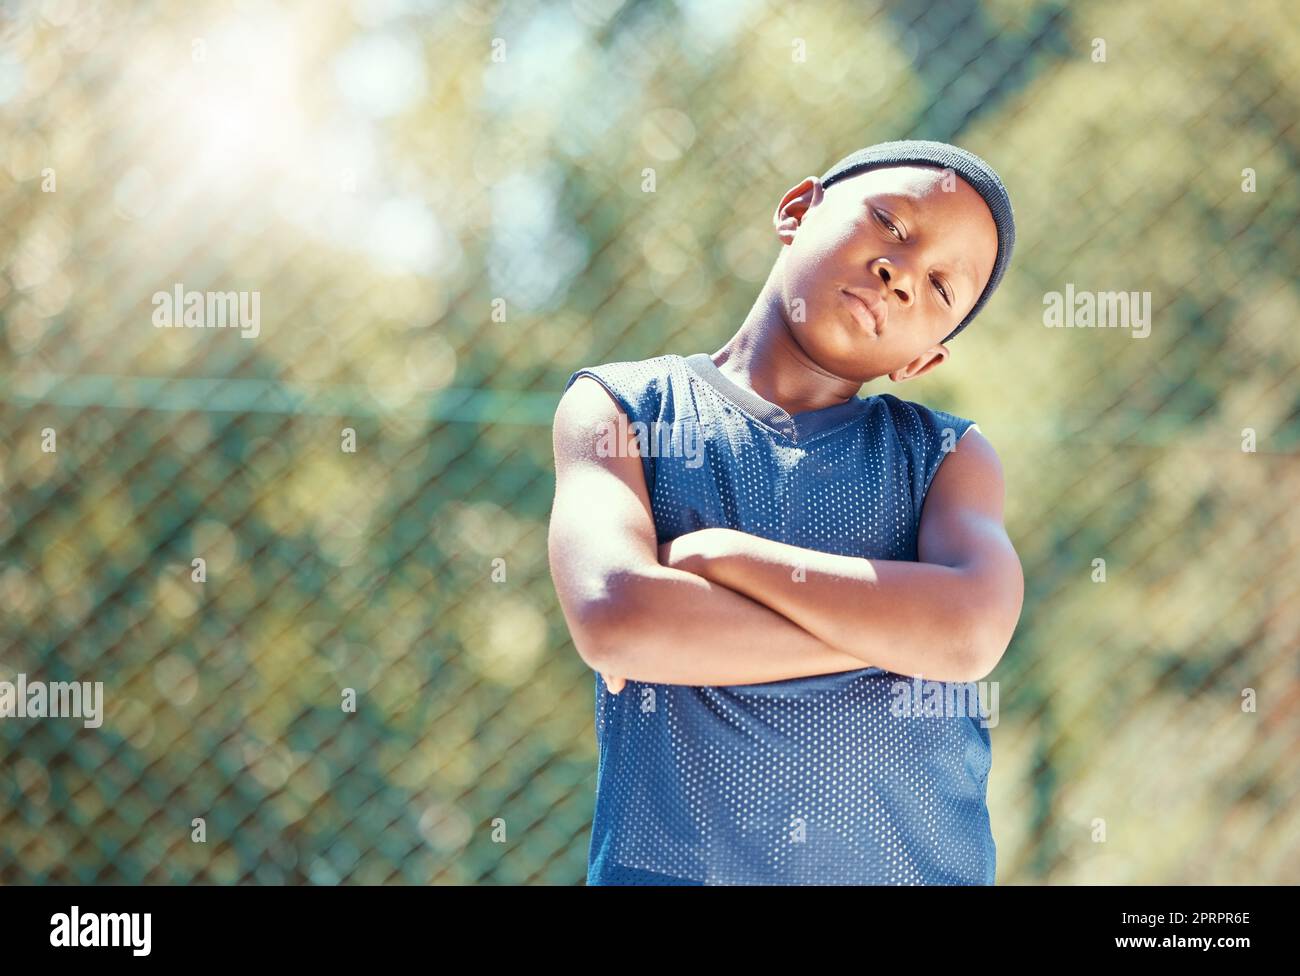 Child, basketball and serious attitude with black boy standing with arms crossed ready to play outside. Proud, confident and cool kid with street swag and ready to stand up against bullying Stock Photo